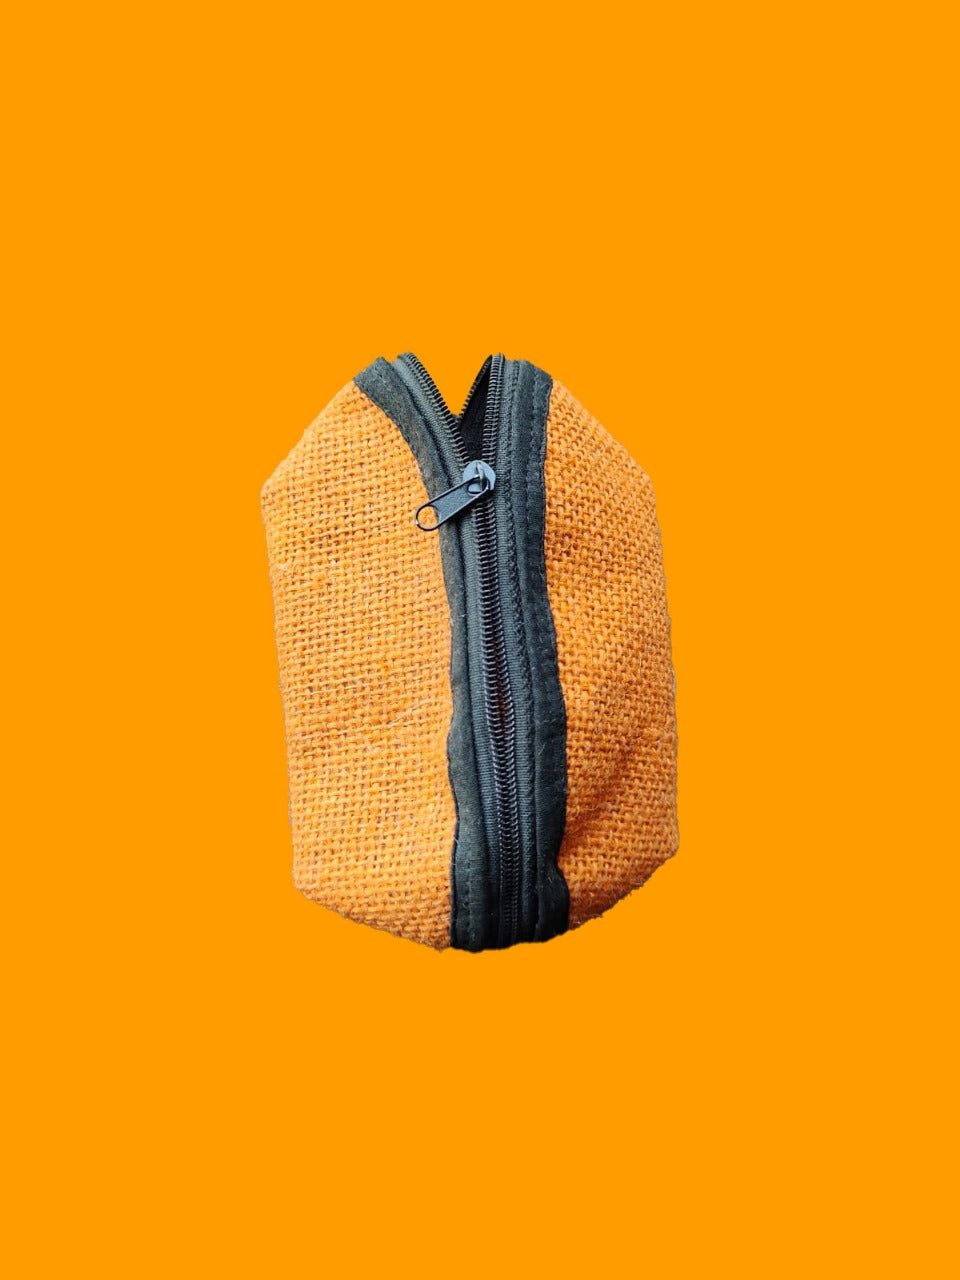 Coin pouch